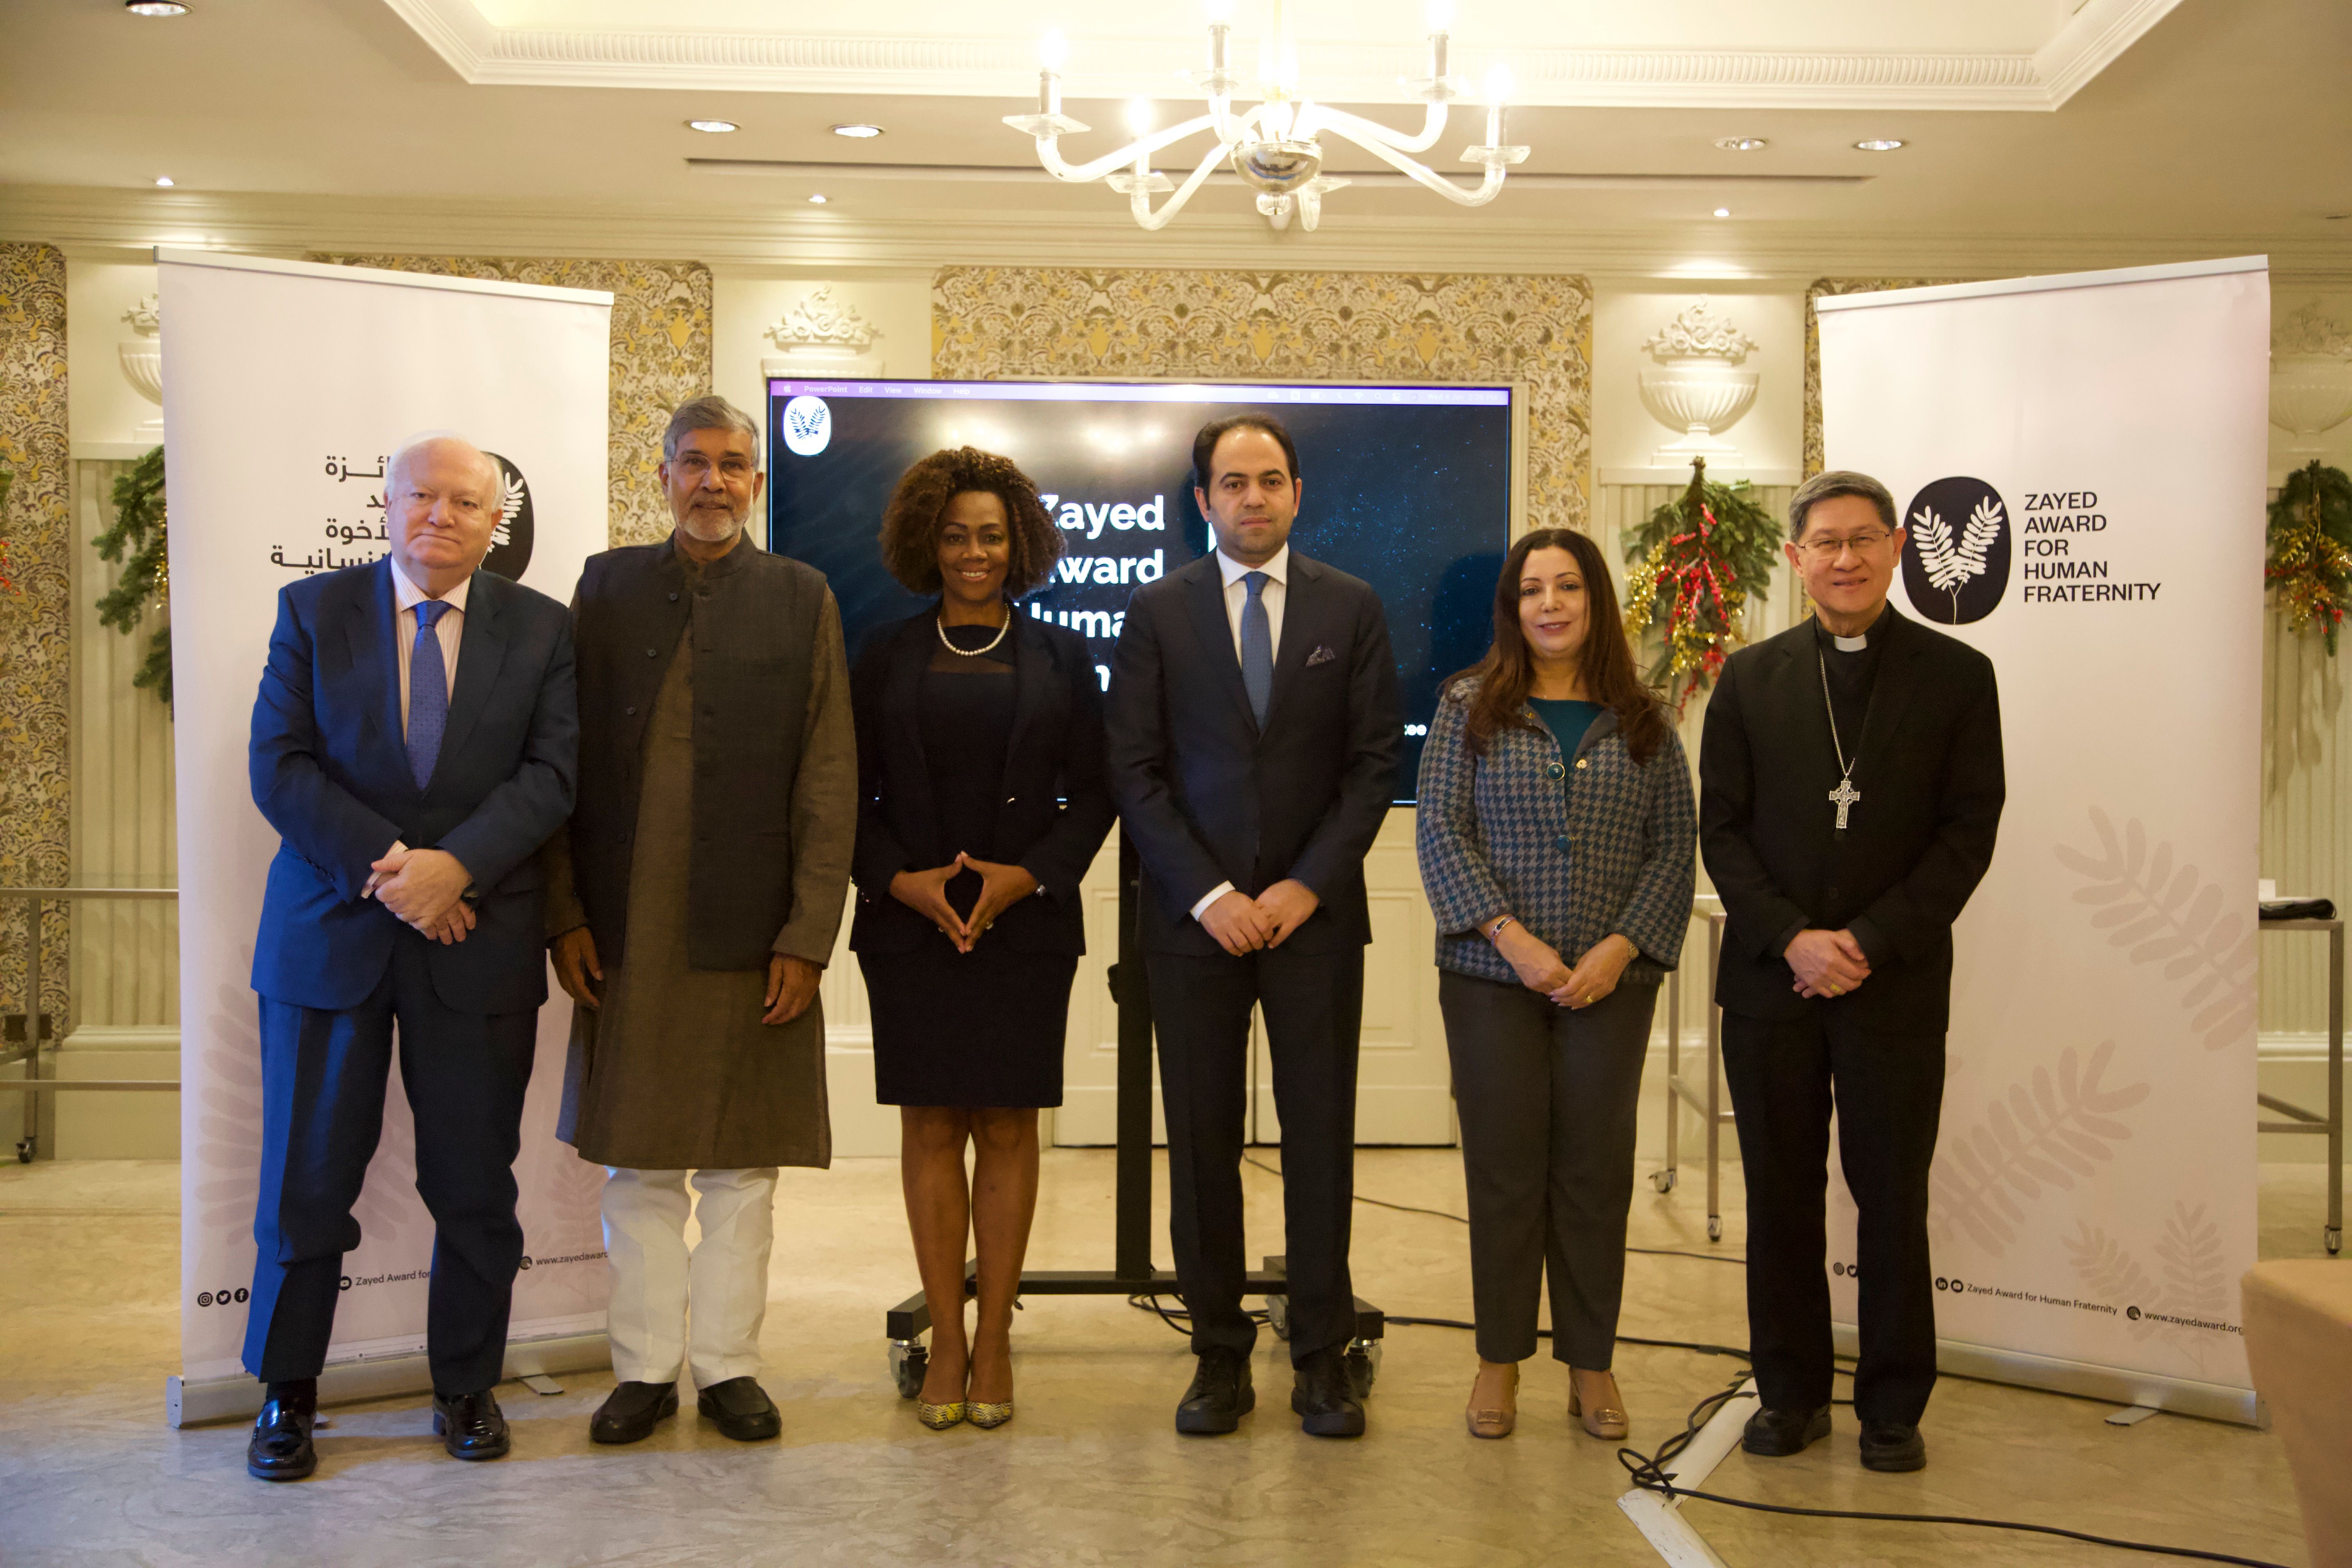 INTERNATIONAL JUDGING COMMITTEE CONVENES IN ROME TO SELECT HONOREE(S) FOR ZAYED AWARD FOR HUMAN FRATERNITY 2023